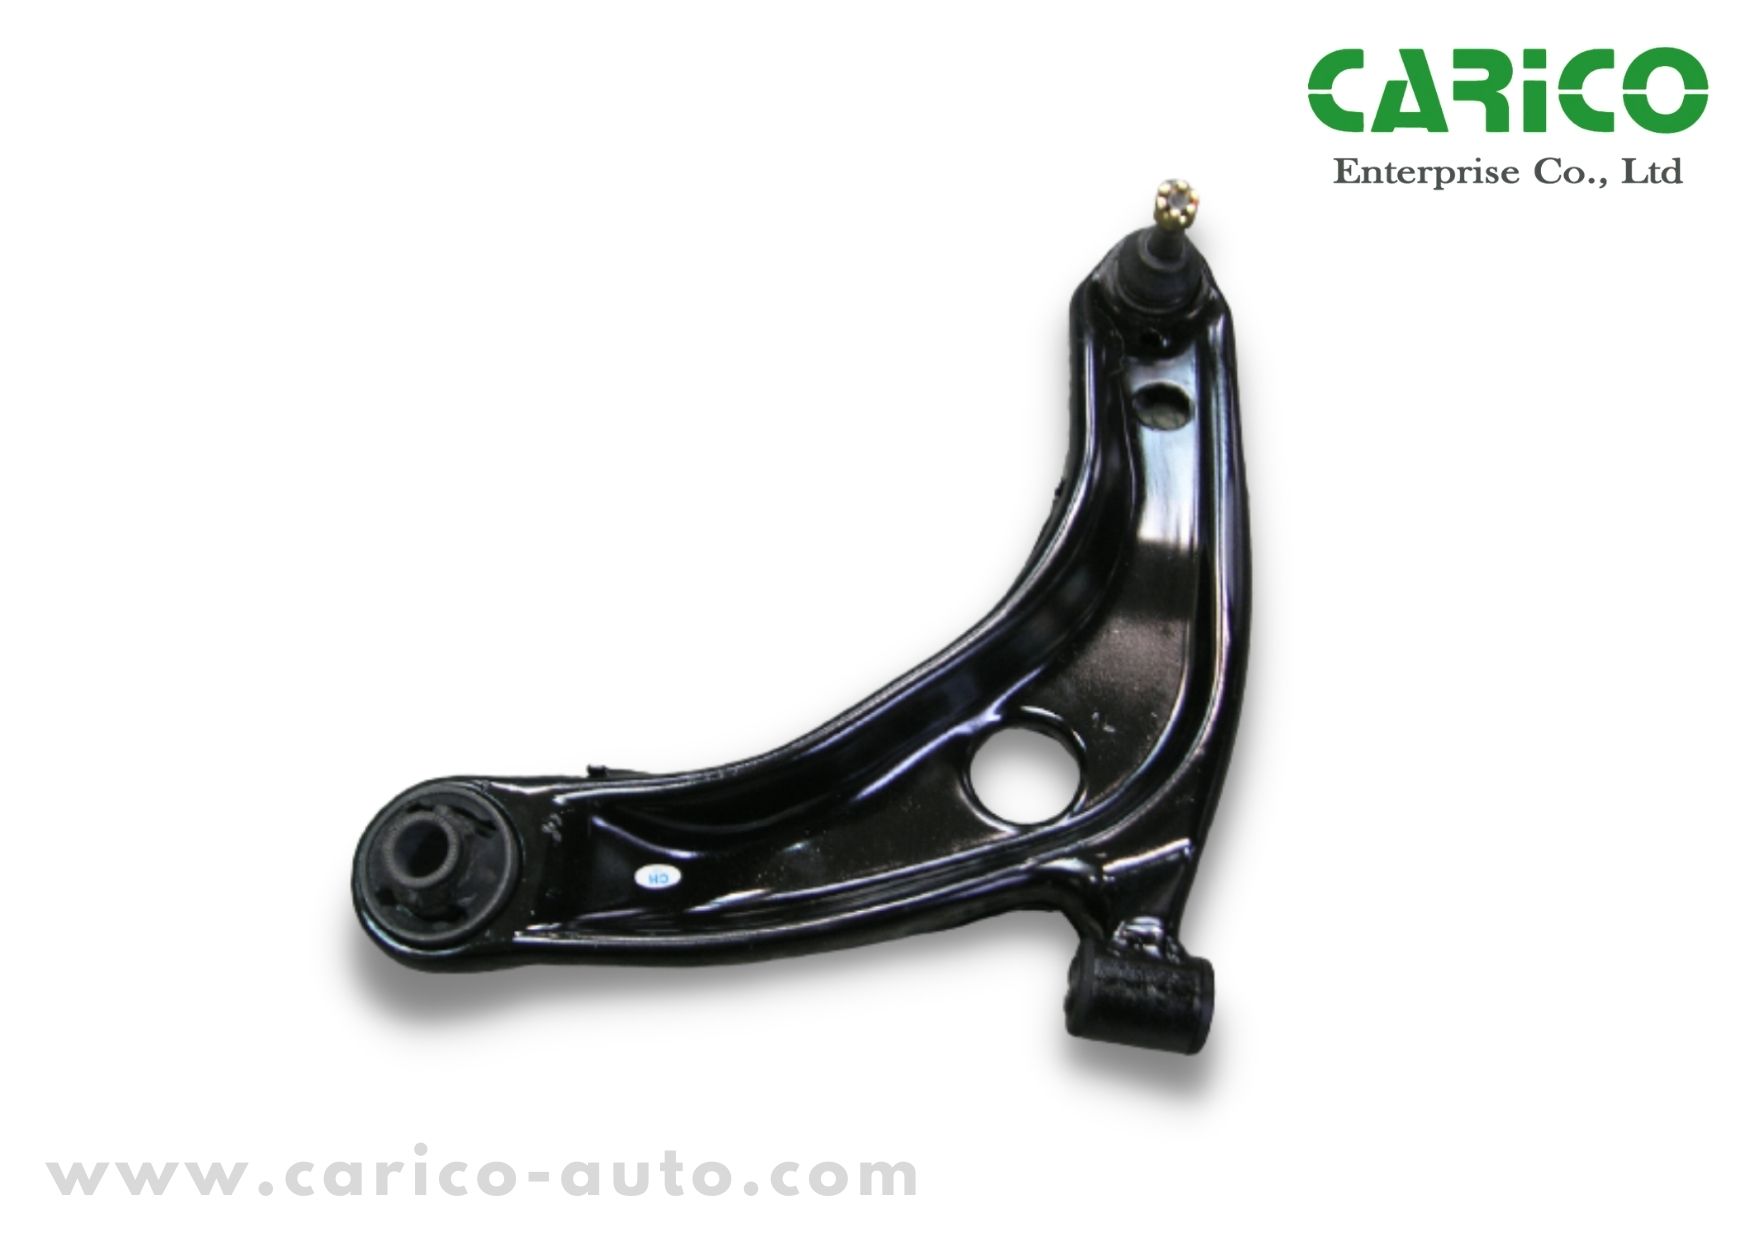 The Best Lower Control Arm Brands in the Aftermarket